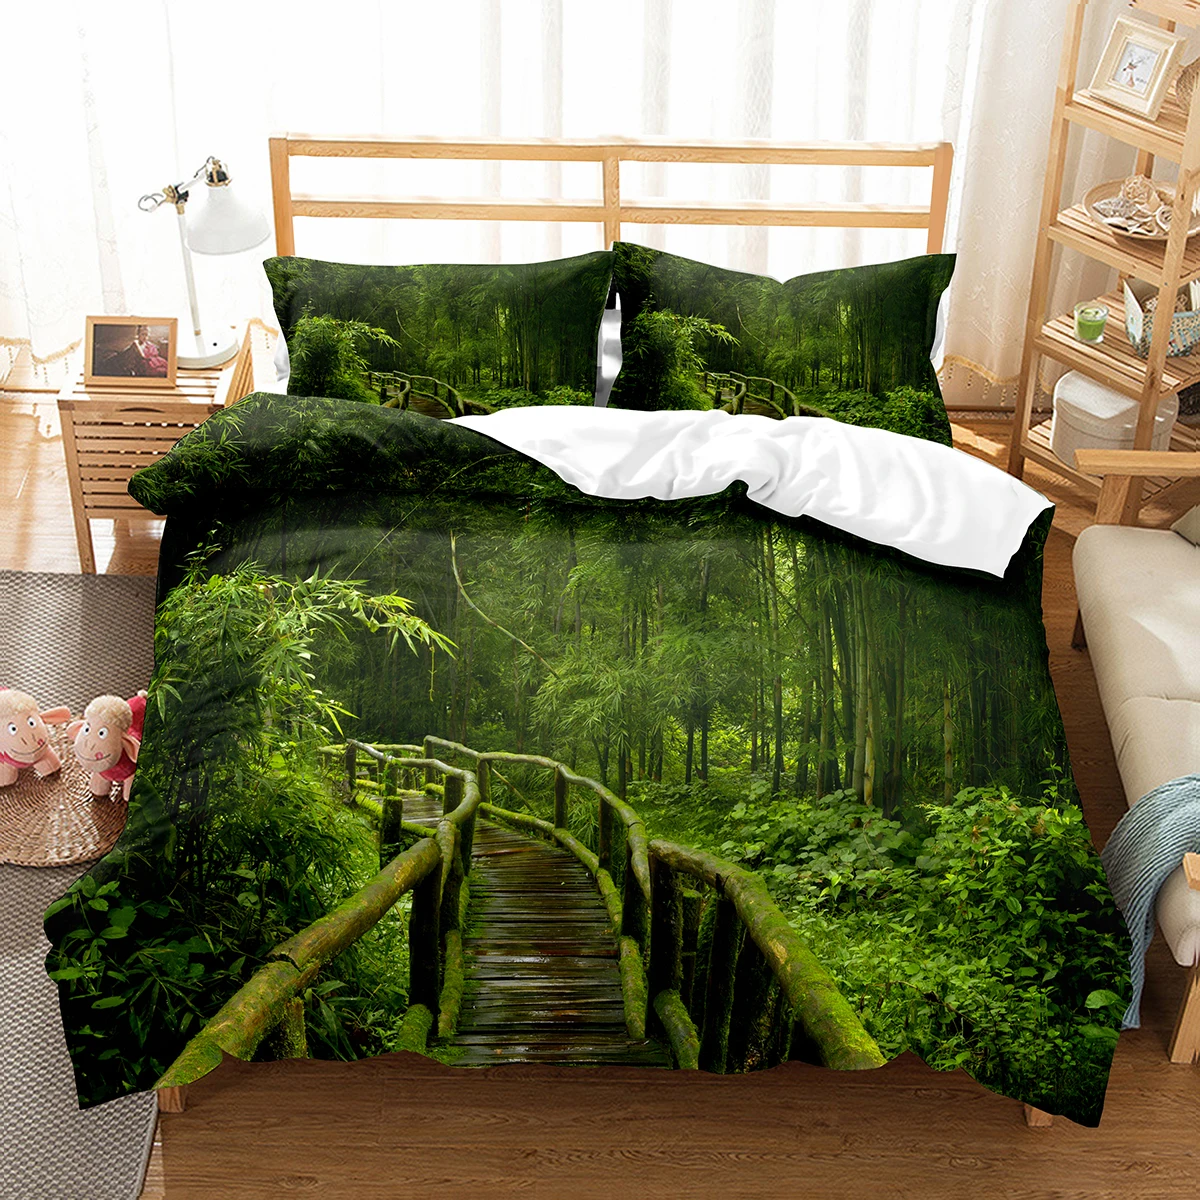 Green Jungle Theme King Queen Full Duvet Cover Forest Trees Bedding Set Natural Landscape Quilt Cover Polyester Comforter Cover